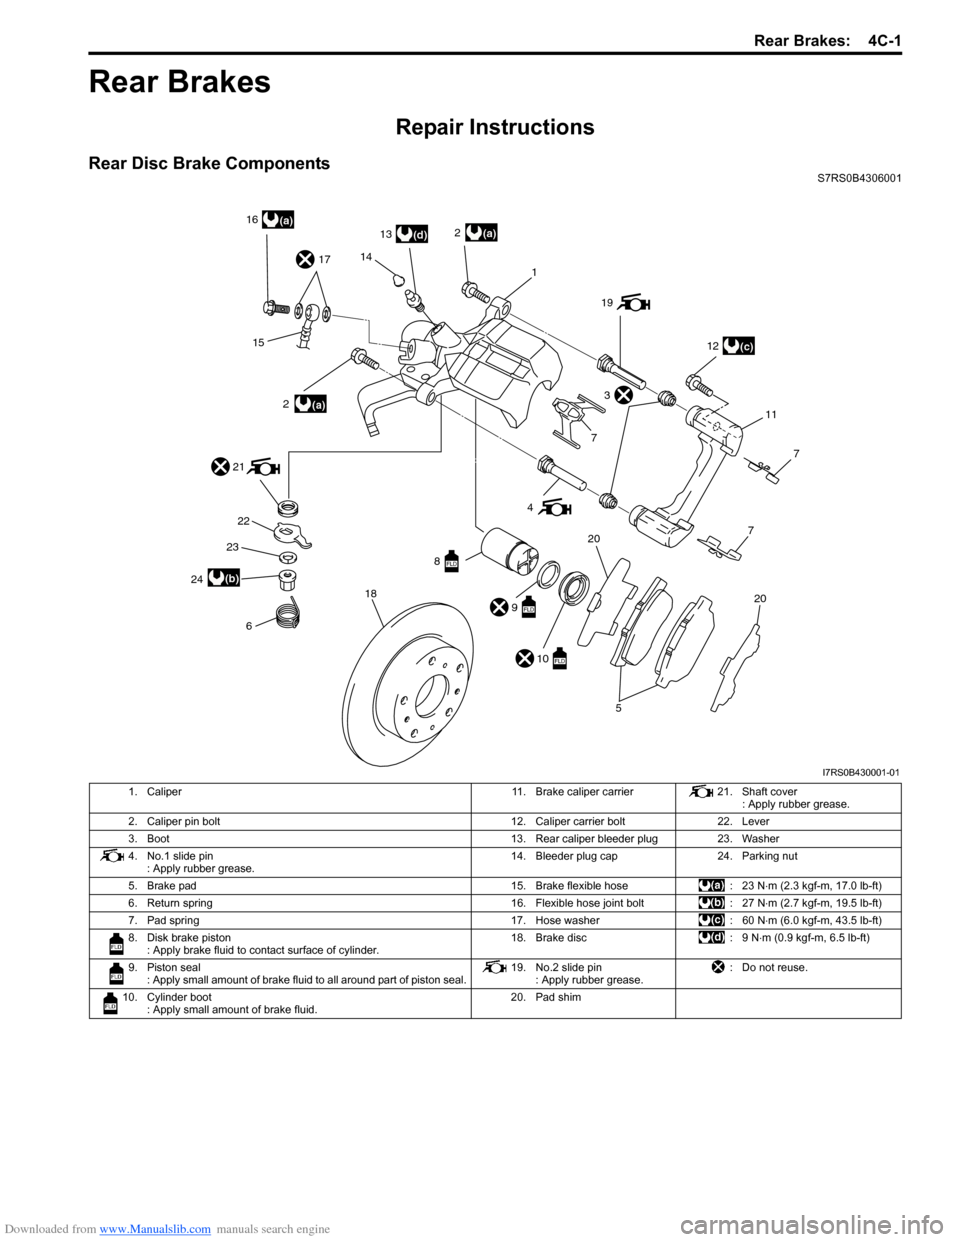 SUZUKI SWIFT 2004 2.G Service Workshop Manual Downloaded from www.Manualslib.com manuals search engine Rear Brakes:  4C-1
Brakes
Rear Brakes
Repair Instructions
Rear Disc Brake ComponentsS7RS0B4306001
(d)
(c)
(a)
(a)
(a)16171413
2
1
15 2 19
12
11